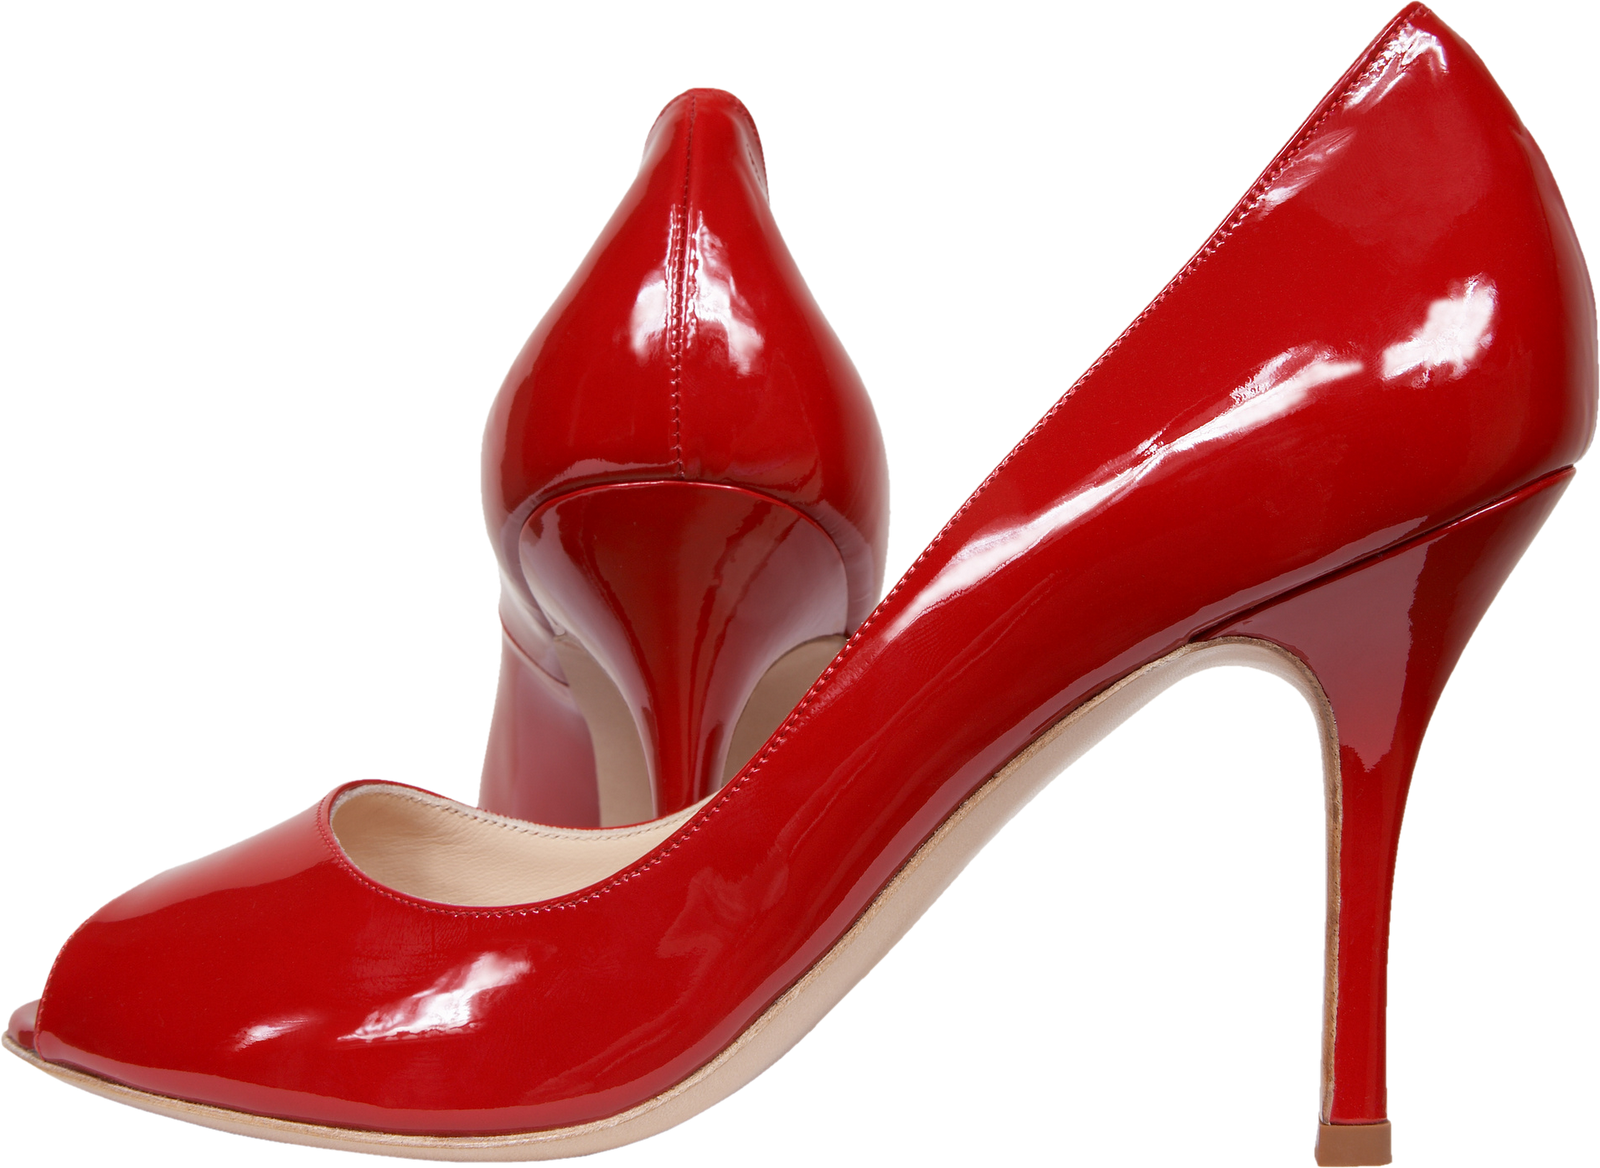 Red High Heel Shoes - Red High Heels Png (1600x1168)